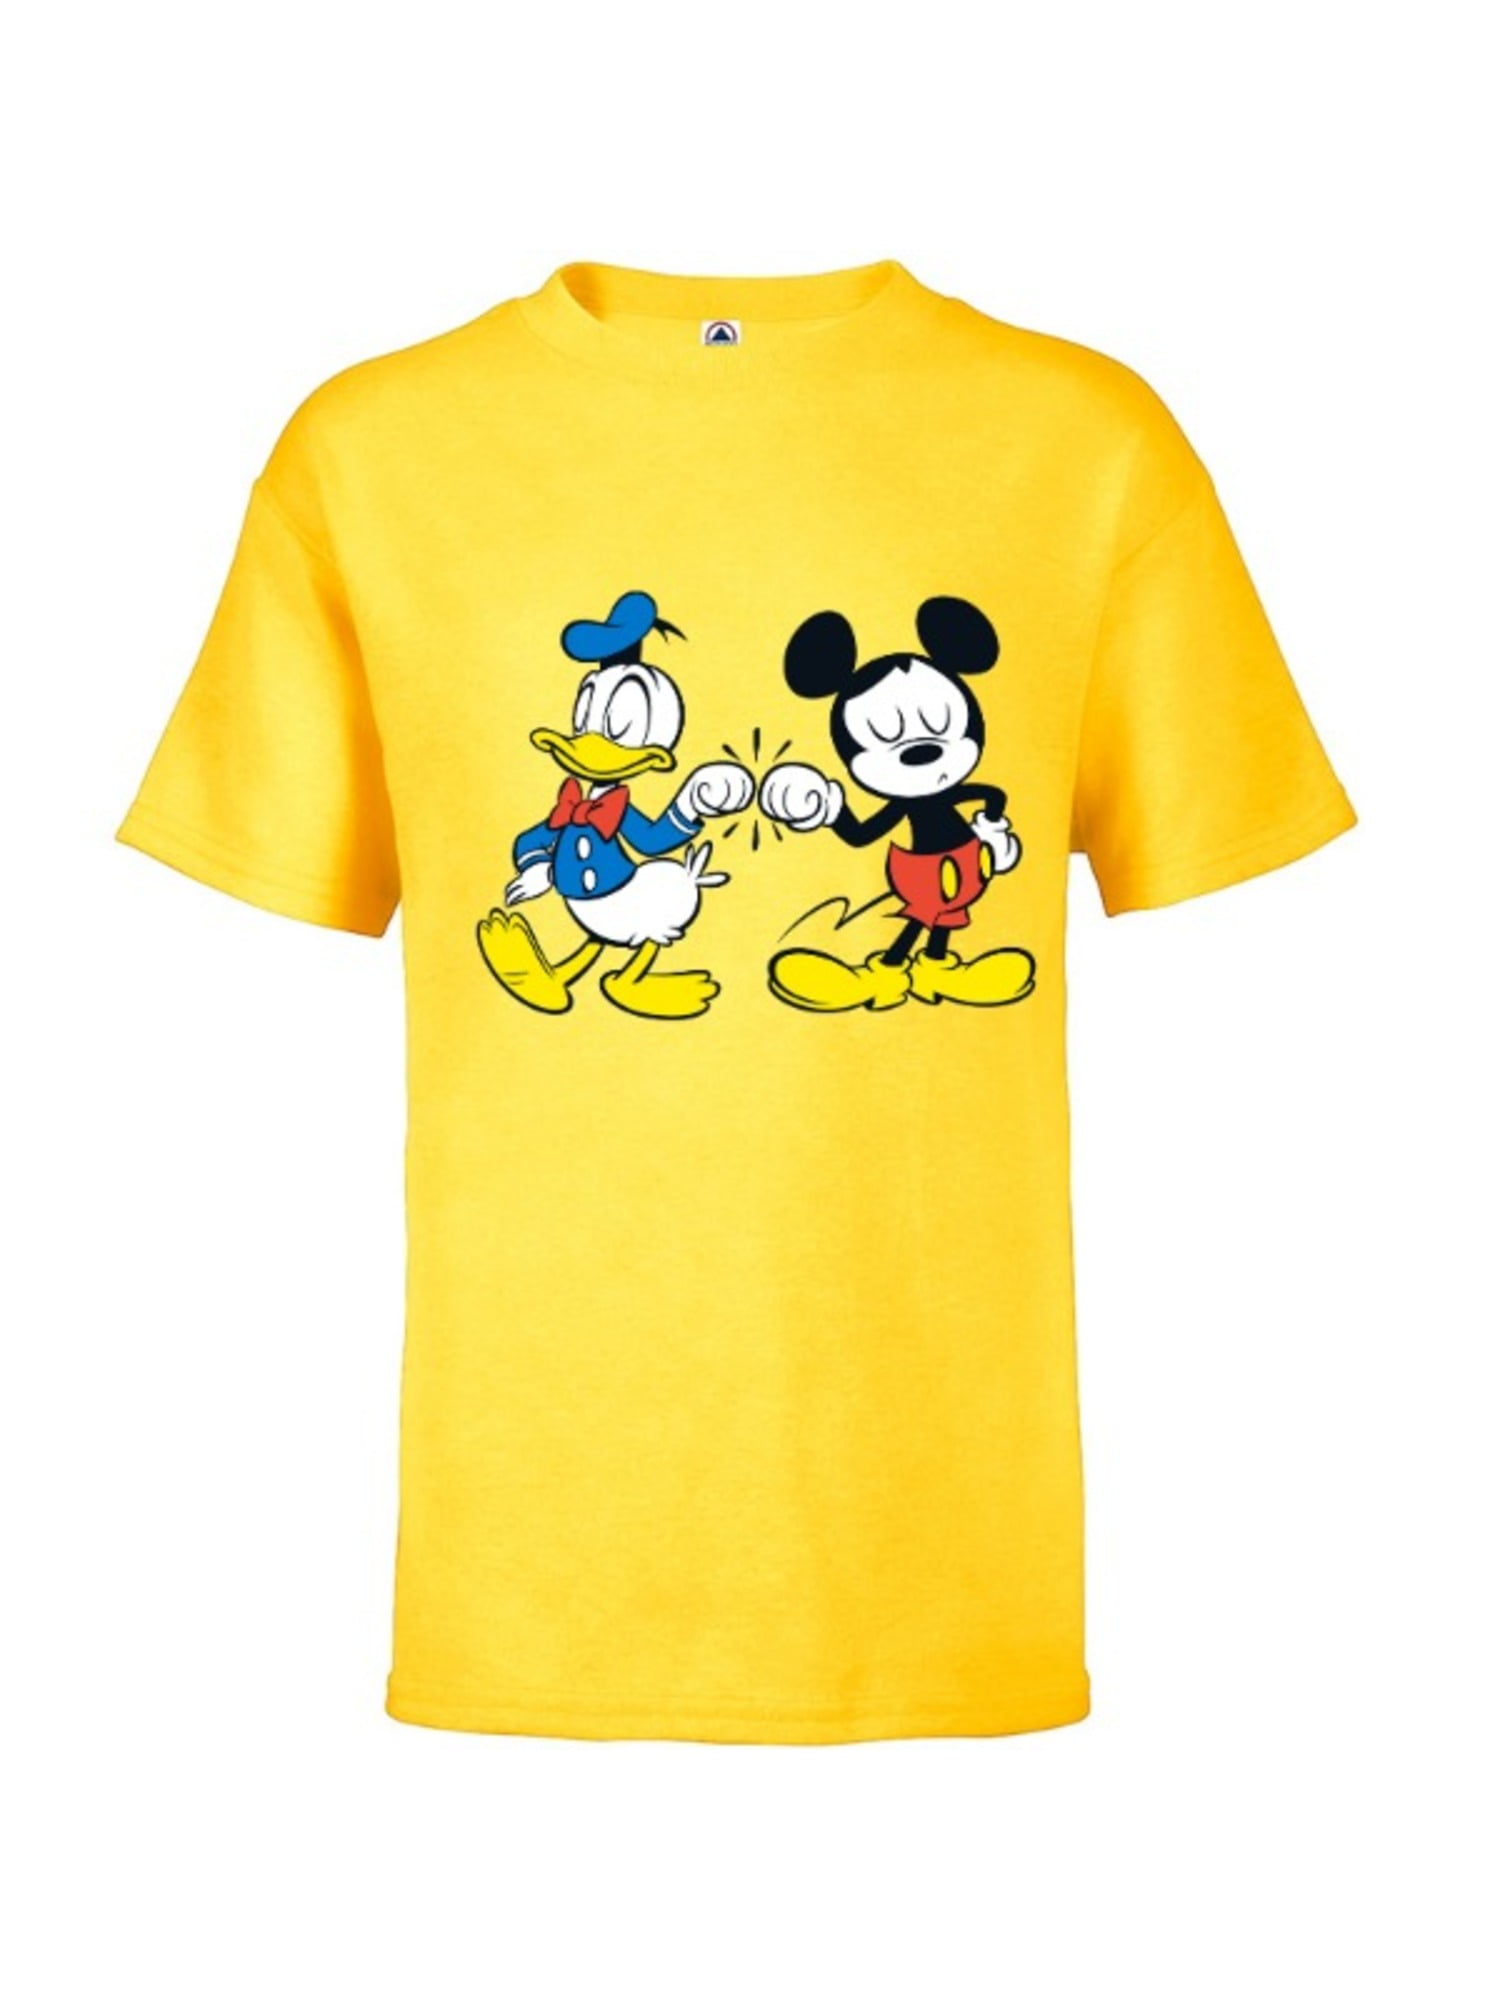 Boys/Girls T-Shirt Incredible Hulk Disney Mickey Mouse Minnie Mouse Or Sofia 